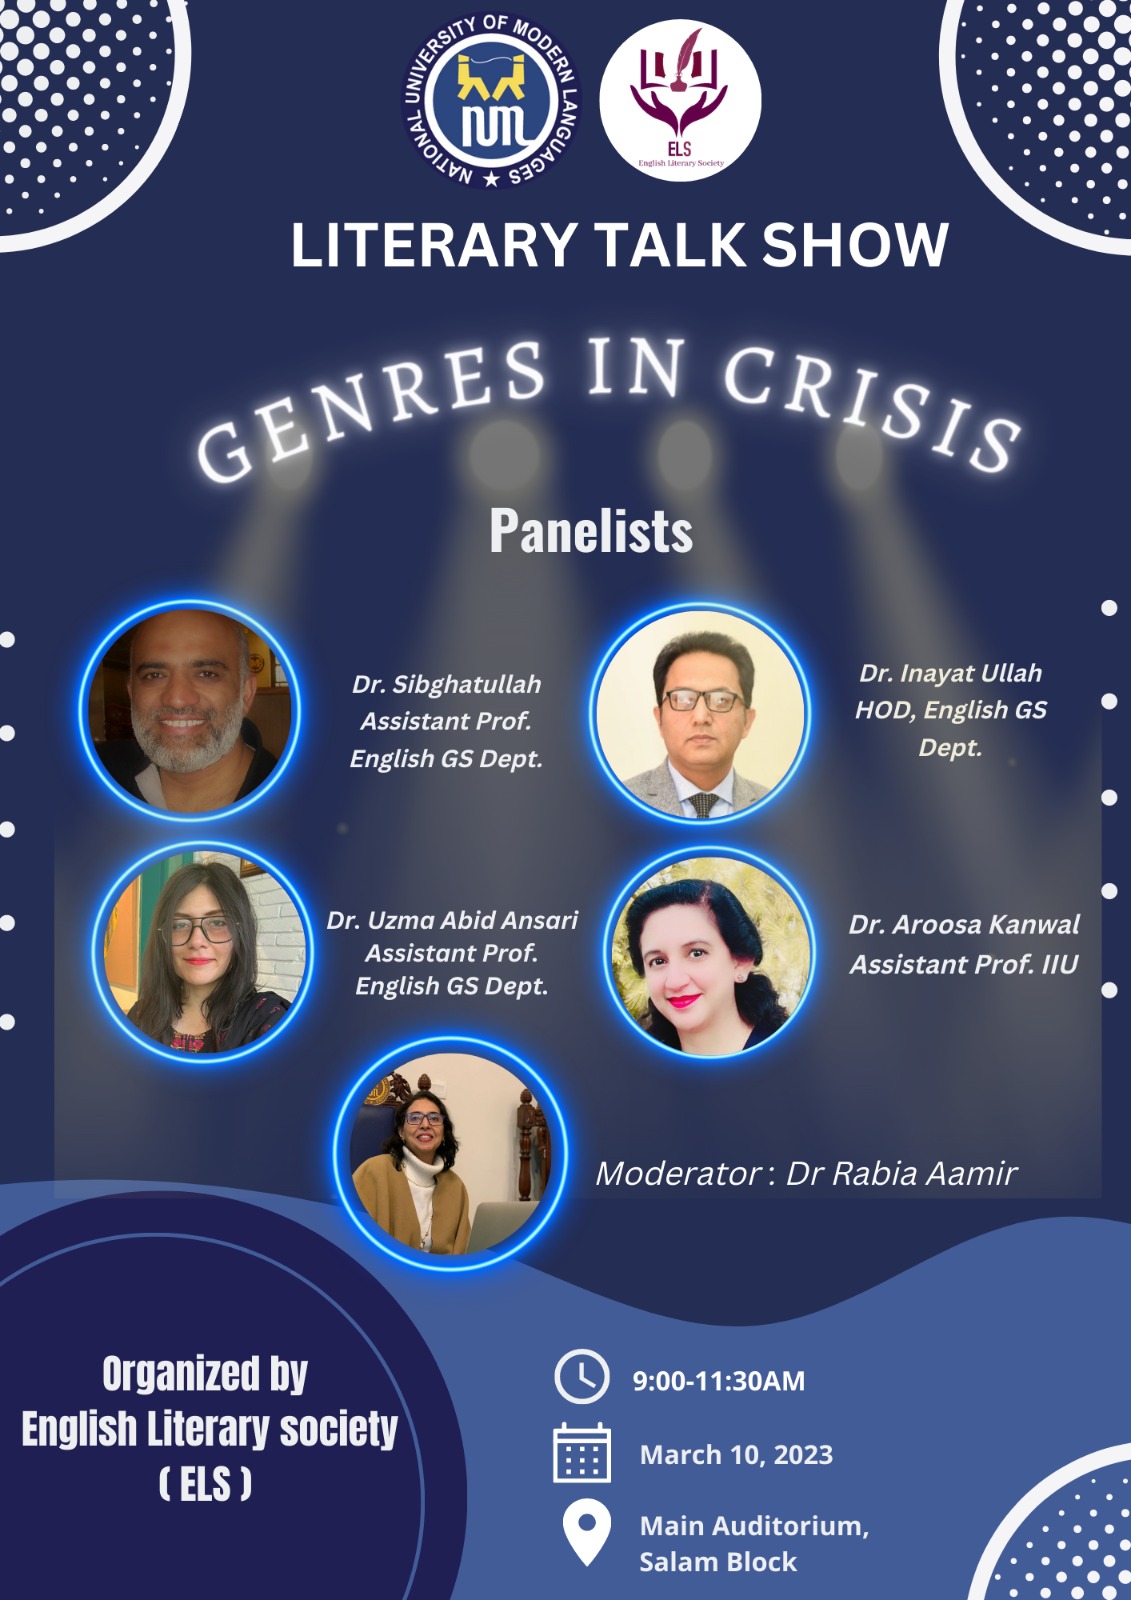 Literary Talk Show: Genres in Crisis